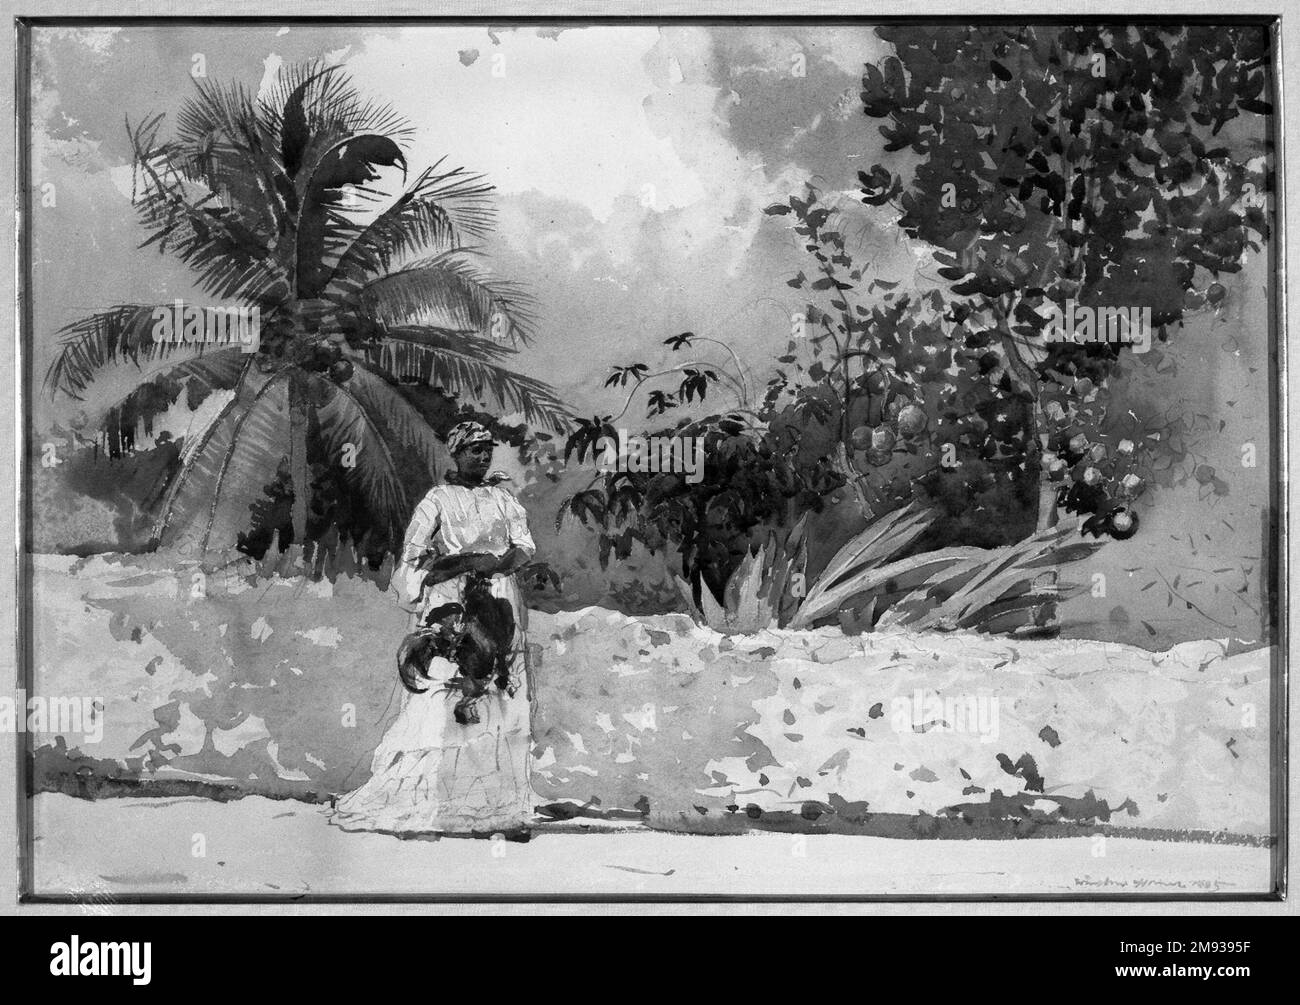 On the Way to Market, Bahamas Winslow Homer (American, 1836-1910). On the Way to Market, Bahamas, 1885. Watercolor over pencil, Sheet: 13 15/16 x 20 1/16 in. (35.4 x 51 cm).  Beginning in 1884, Winslow Homer—one of the most admired U.S. artists of the nineteenth century—made numerous winter visits to tropical locations. Watercolor became his preferred medium while traveling. This light-filled composition is one of at least six depictions Homer completed in 1885 of everyday scenes featuring local market women on the coral streets of the Bahamian capital, Nassau. A comienzos de 1884, Winslow Hom Stock Photo